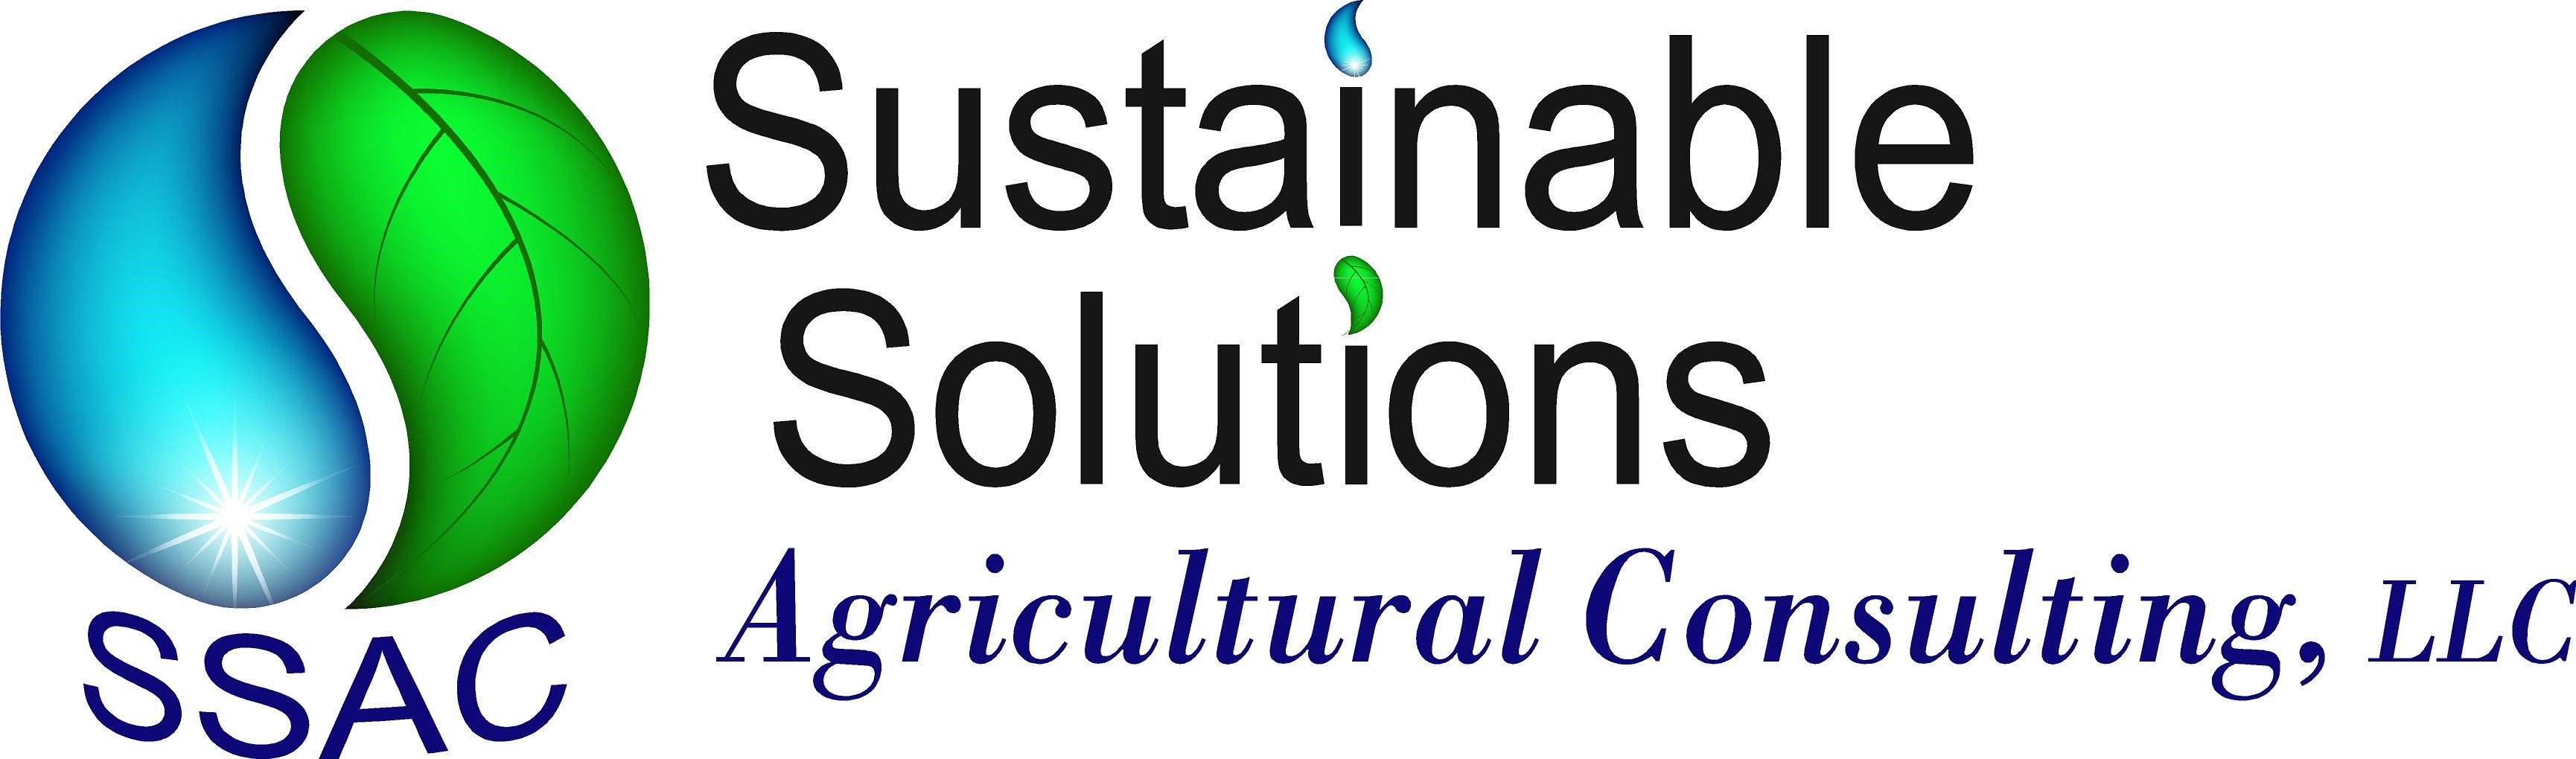 Sustainable Solutions Agricultural Consulting